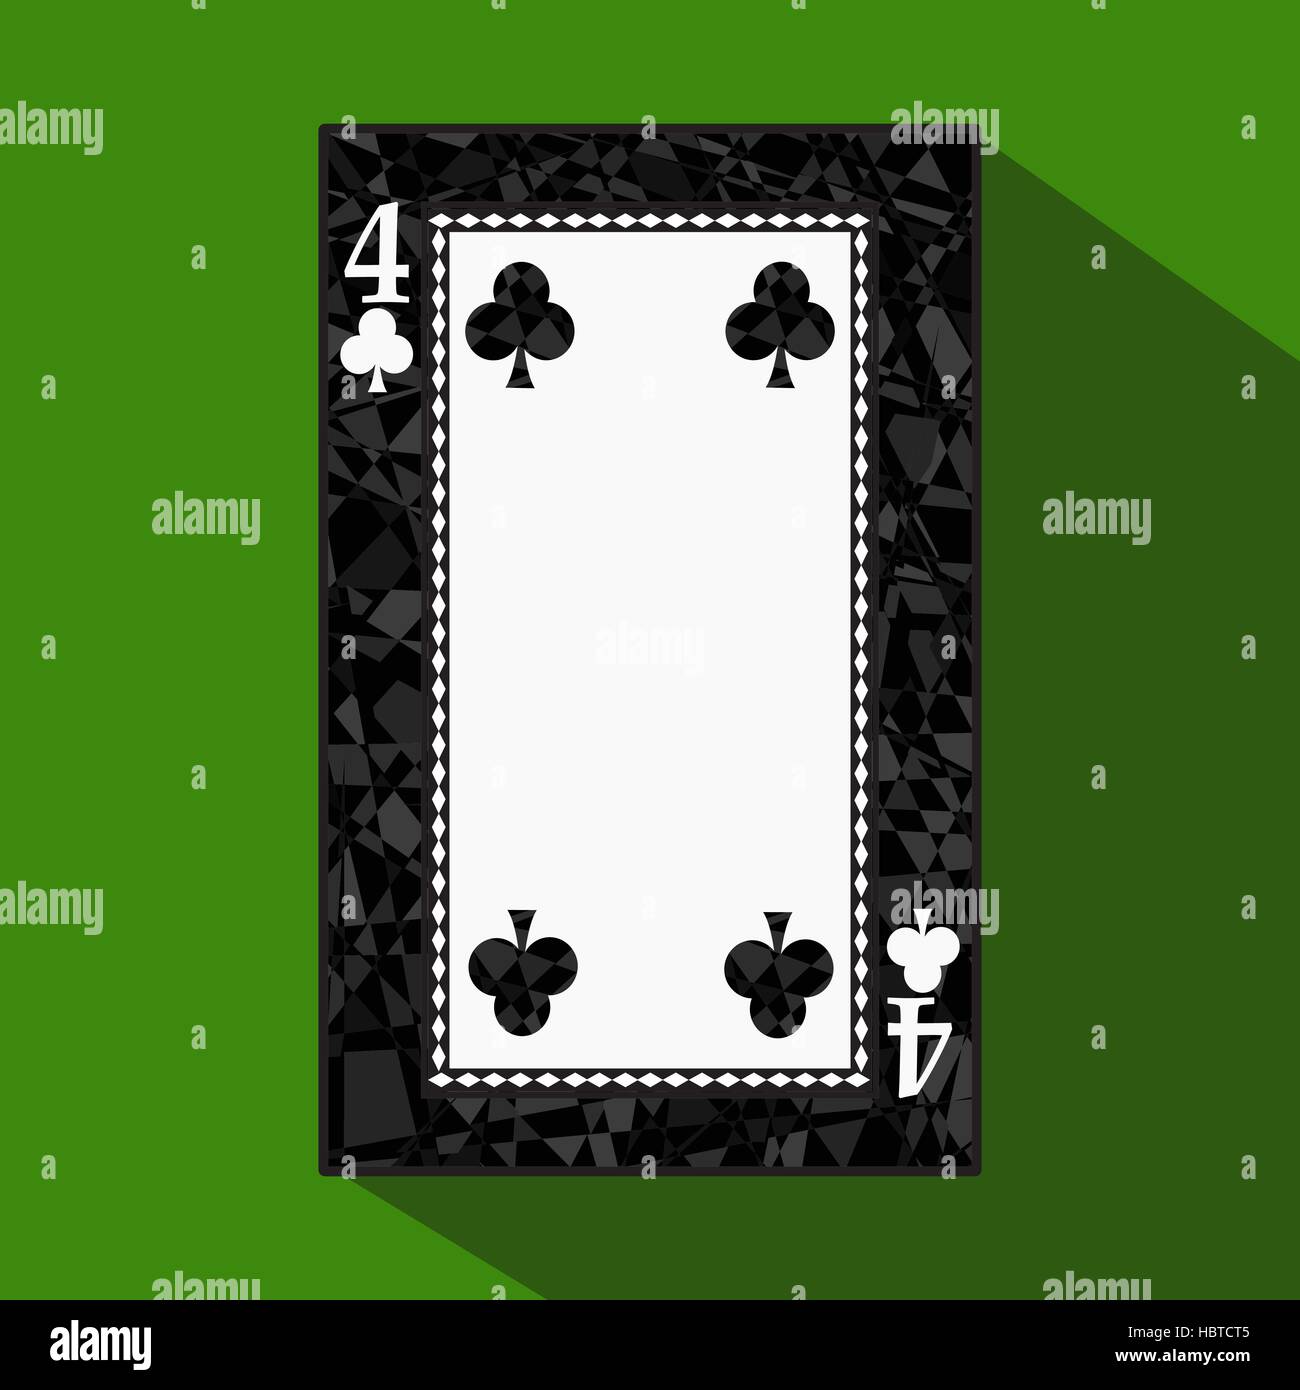 playing card. the icon picture is easy. CLUB FOUR 4 about dark region boundary. a vector illustration on a green background. application appointment f Stock Vector